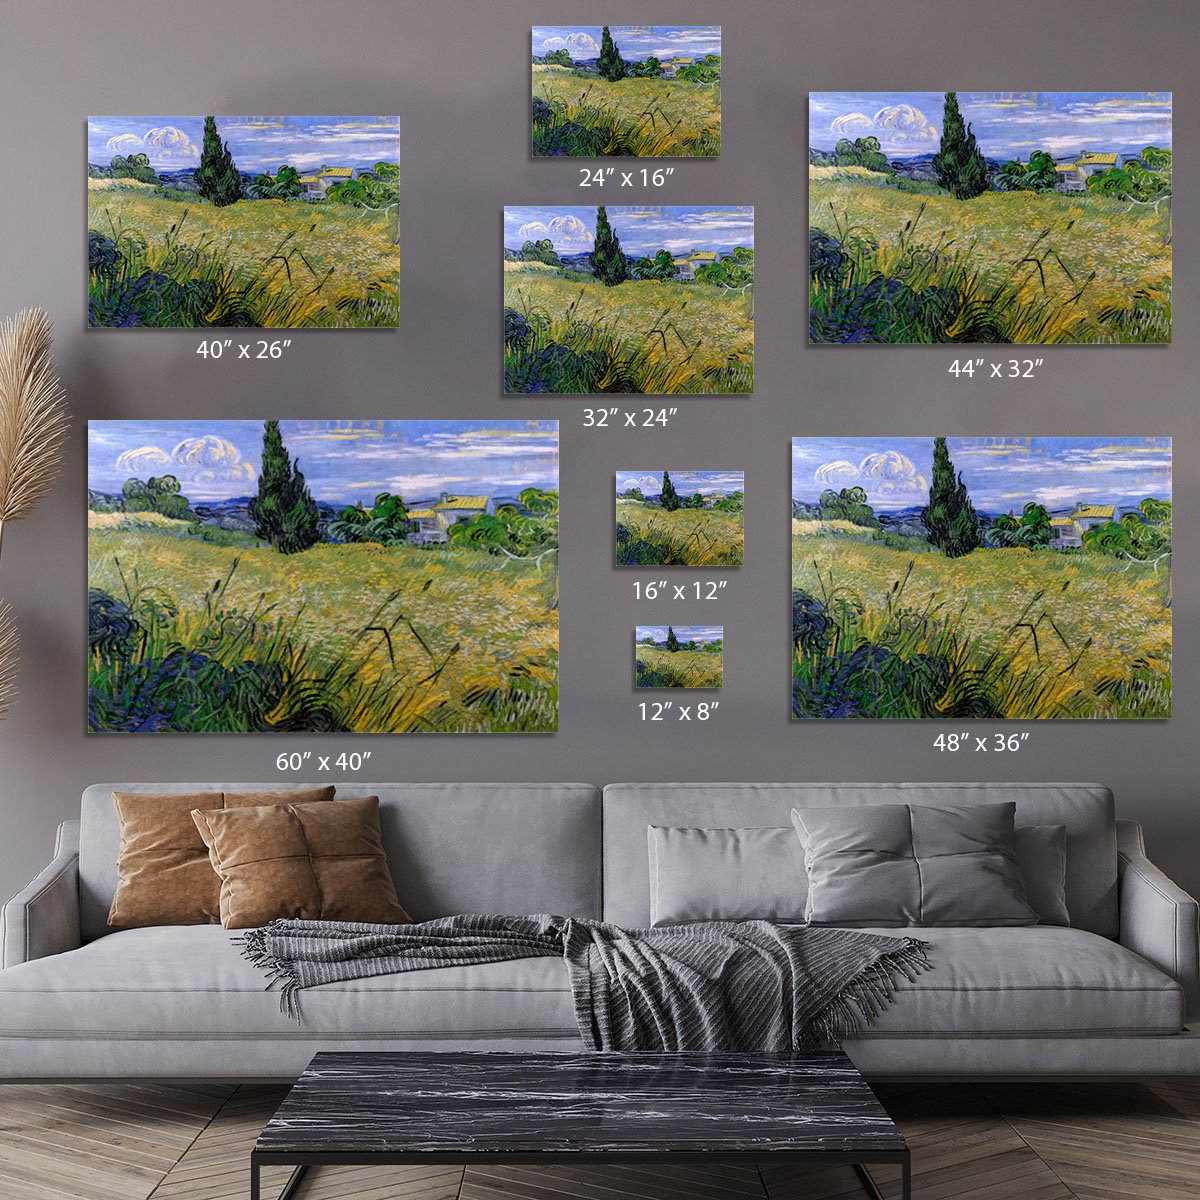 Green Wheat Field with Cypress by Van Gogh Canvas Print or Poster